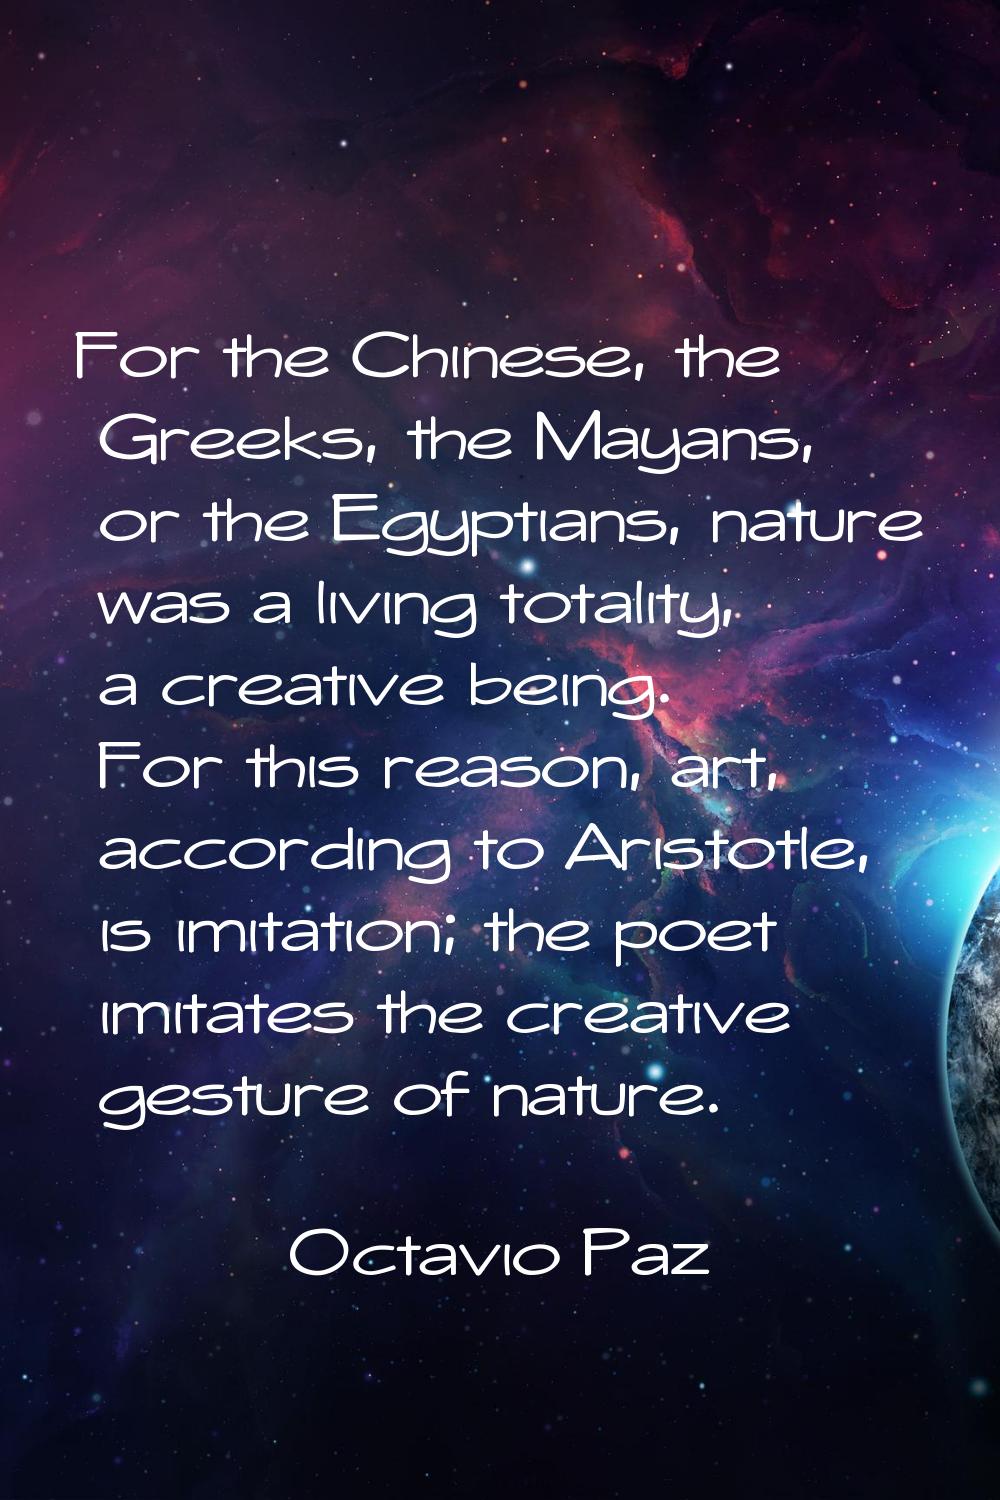 For the Chinese, the Greeks, the Mayans, or the Egyptians, nature was a living totality, a creative